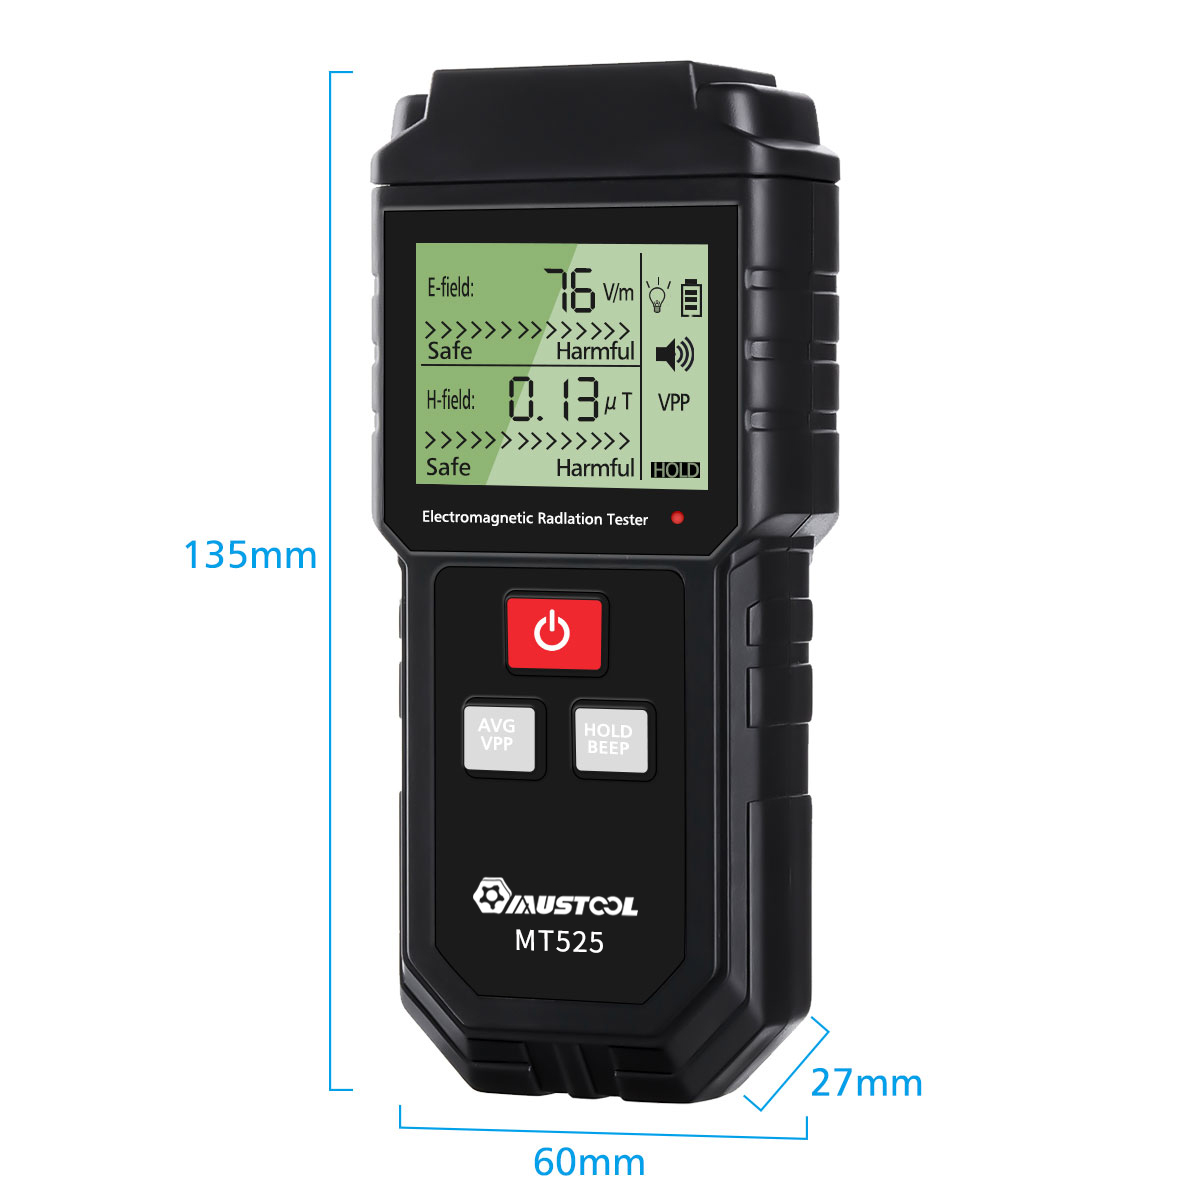 MUSTOOL MT525 Electromagnetic Radiation Tester Electric Field & Magnetic Field Dosimeter Tester Sound and Light Alarm 14